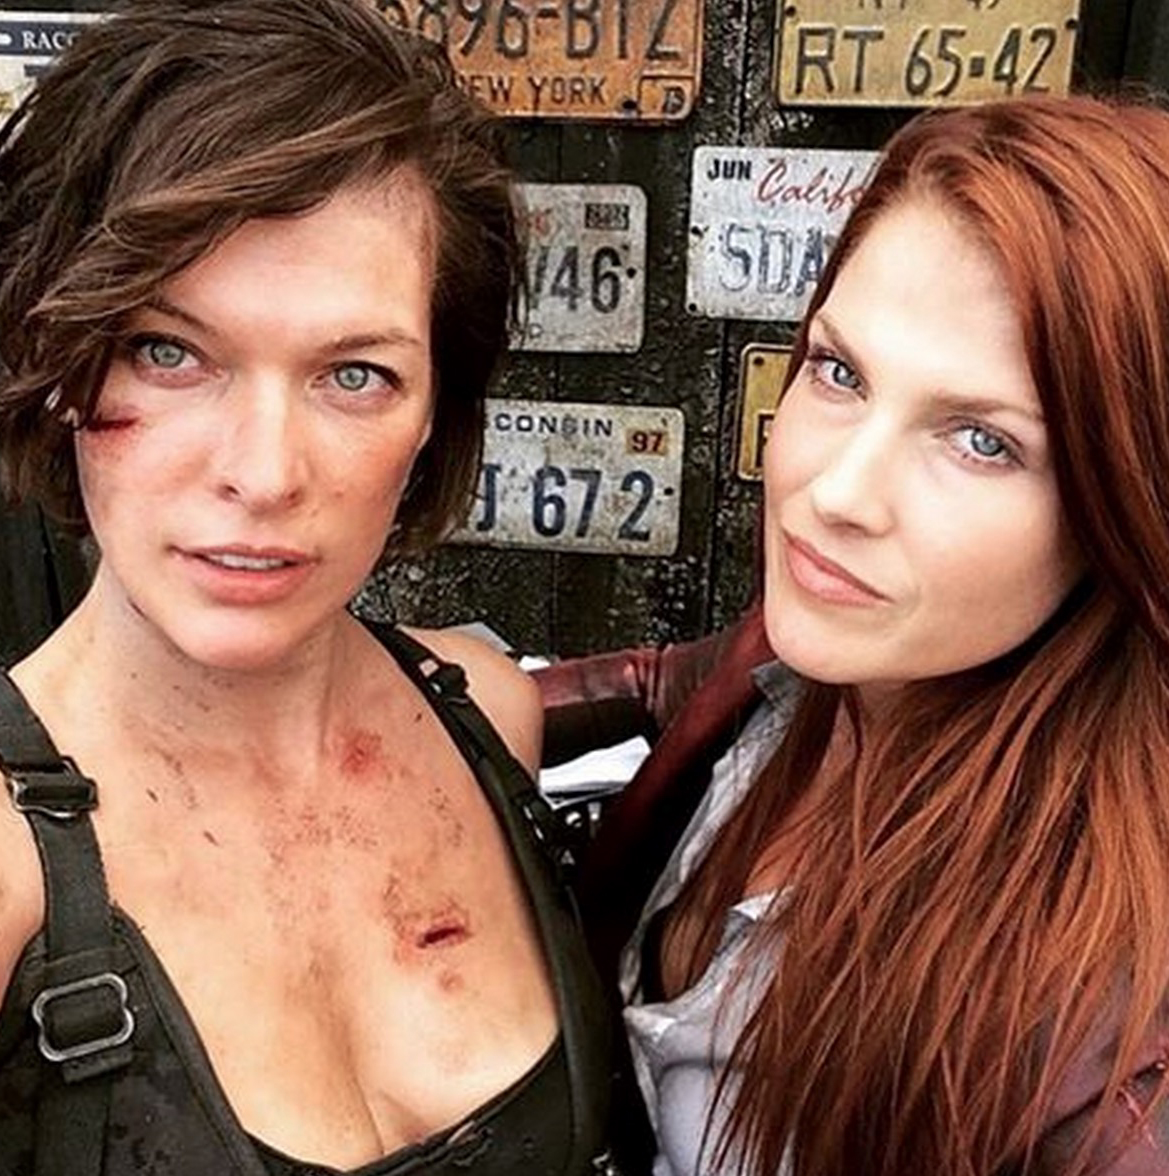  The Official Milla Jovovich Website :: Resident Evil: The Final  Chapter (2015)